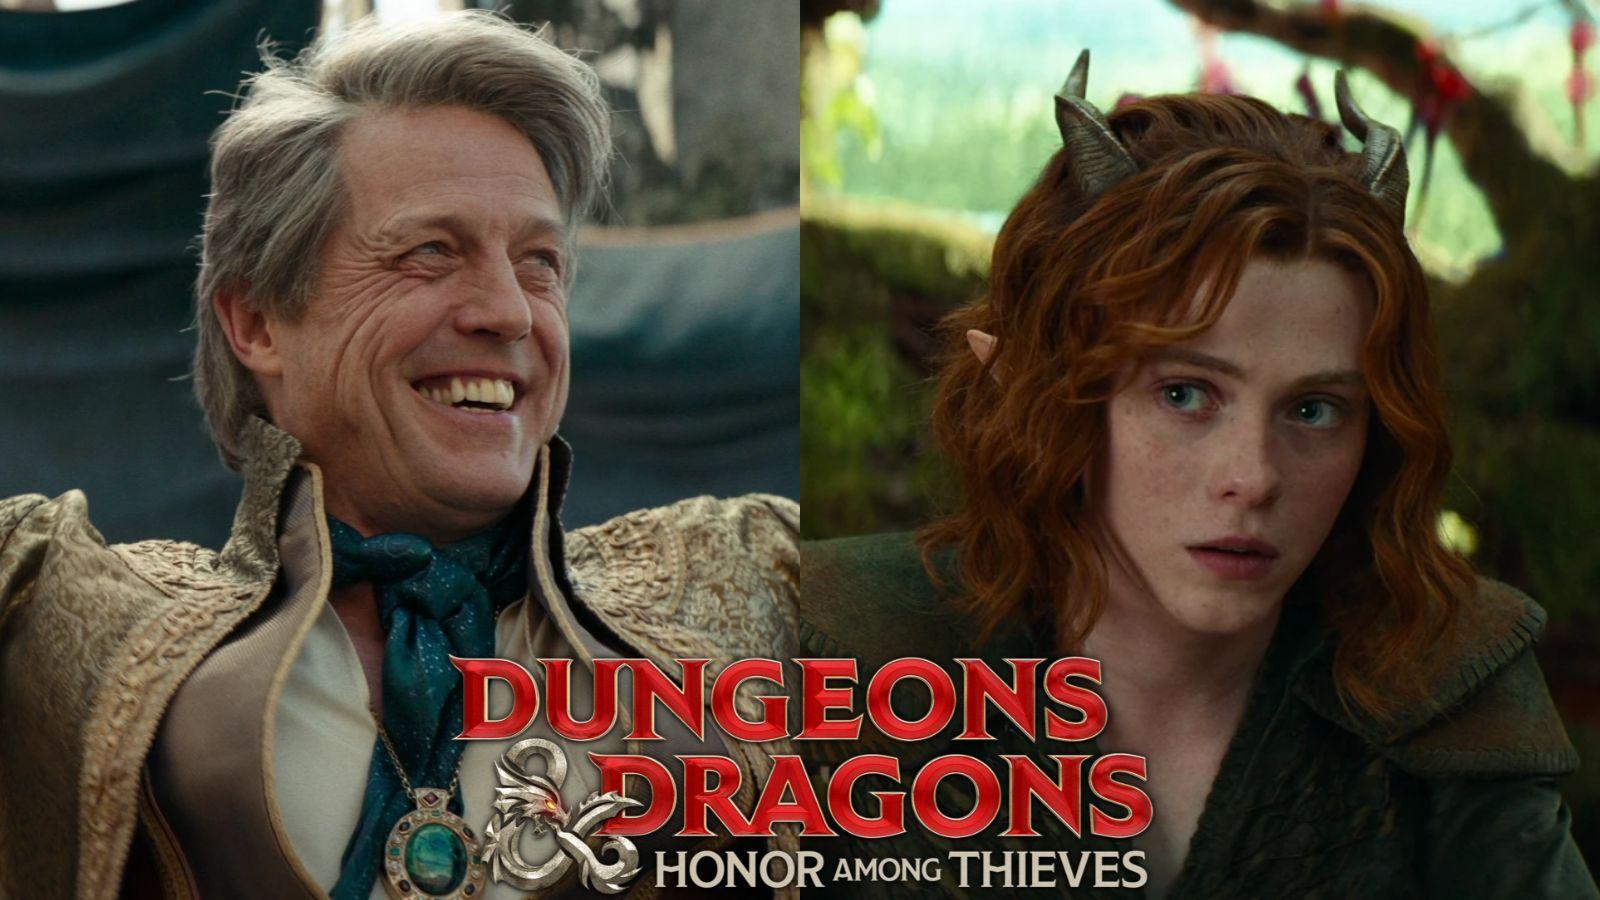 Dungeons and Dragons honor among thieves class